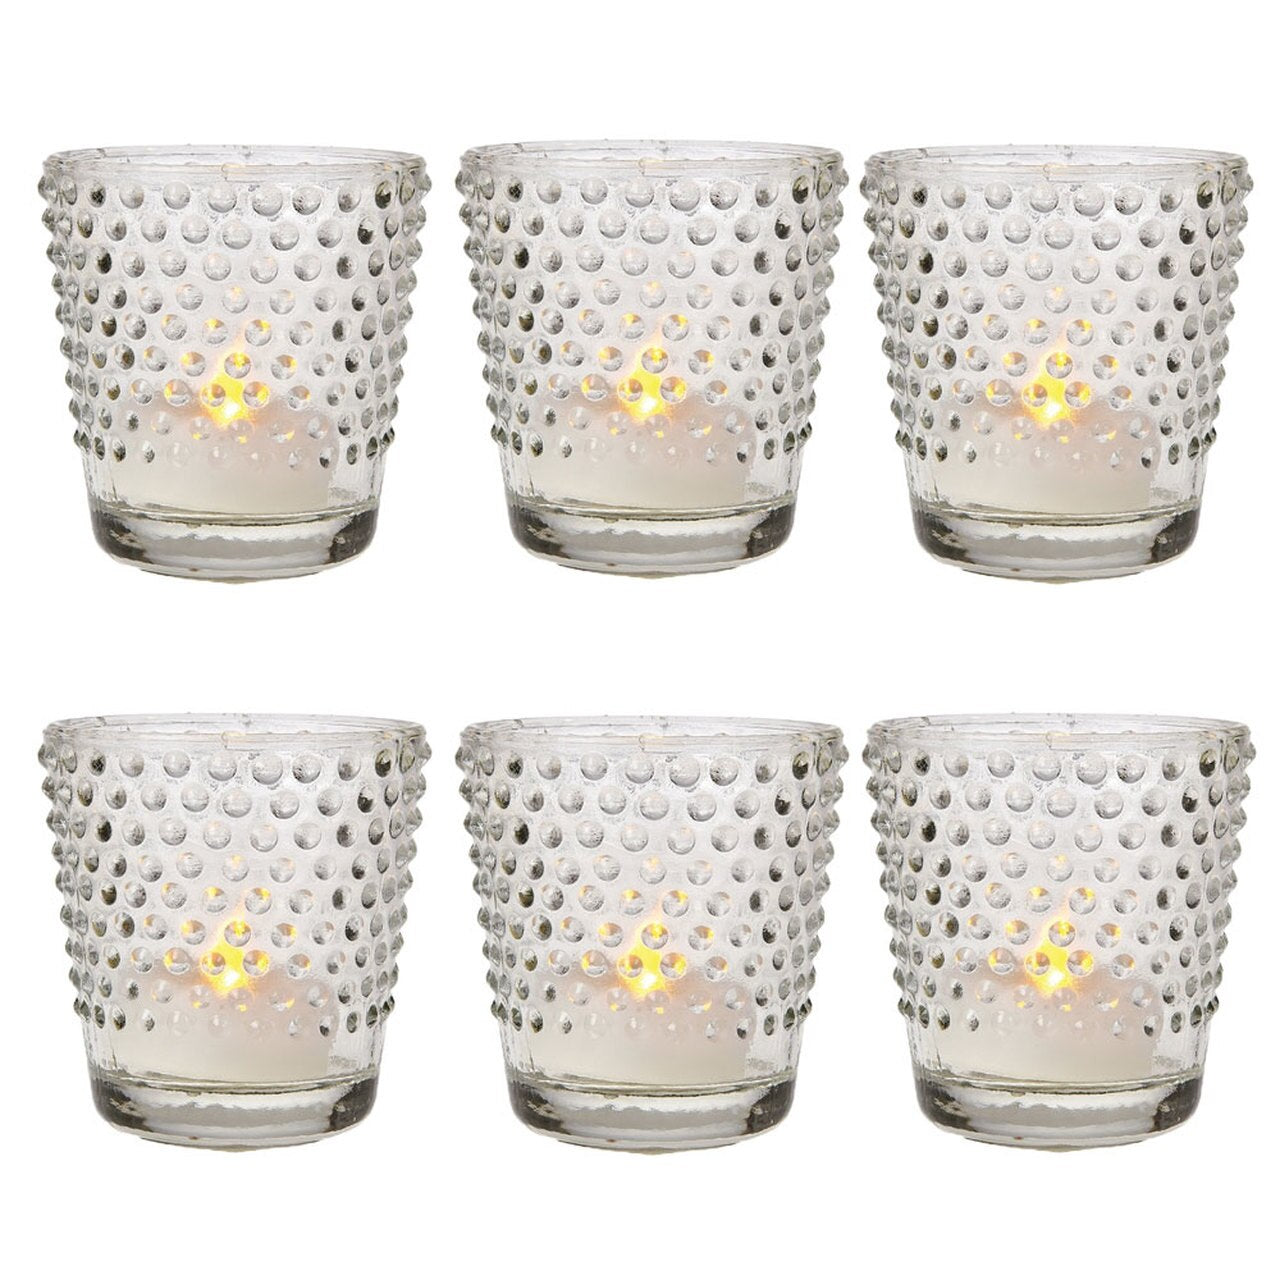 6 Pack | Hobnail Glass Candle Holder (2.5-Inch, Candace Design, Clear) - Use with Tea Lights - For Home Decor, Parties, and Wedding Decorations - PaperLanternStore.com - Paper Lanterns, Decor, Party Lights & More